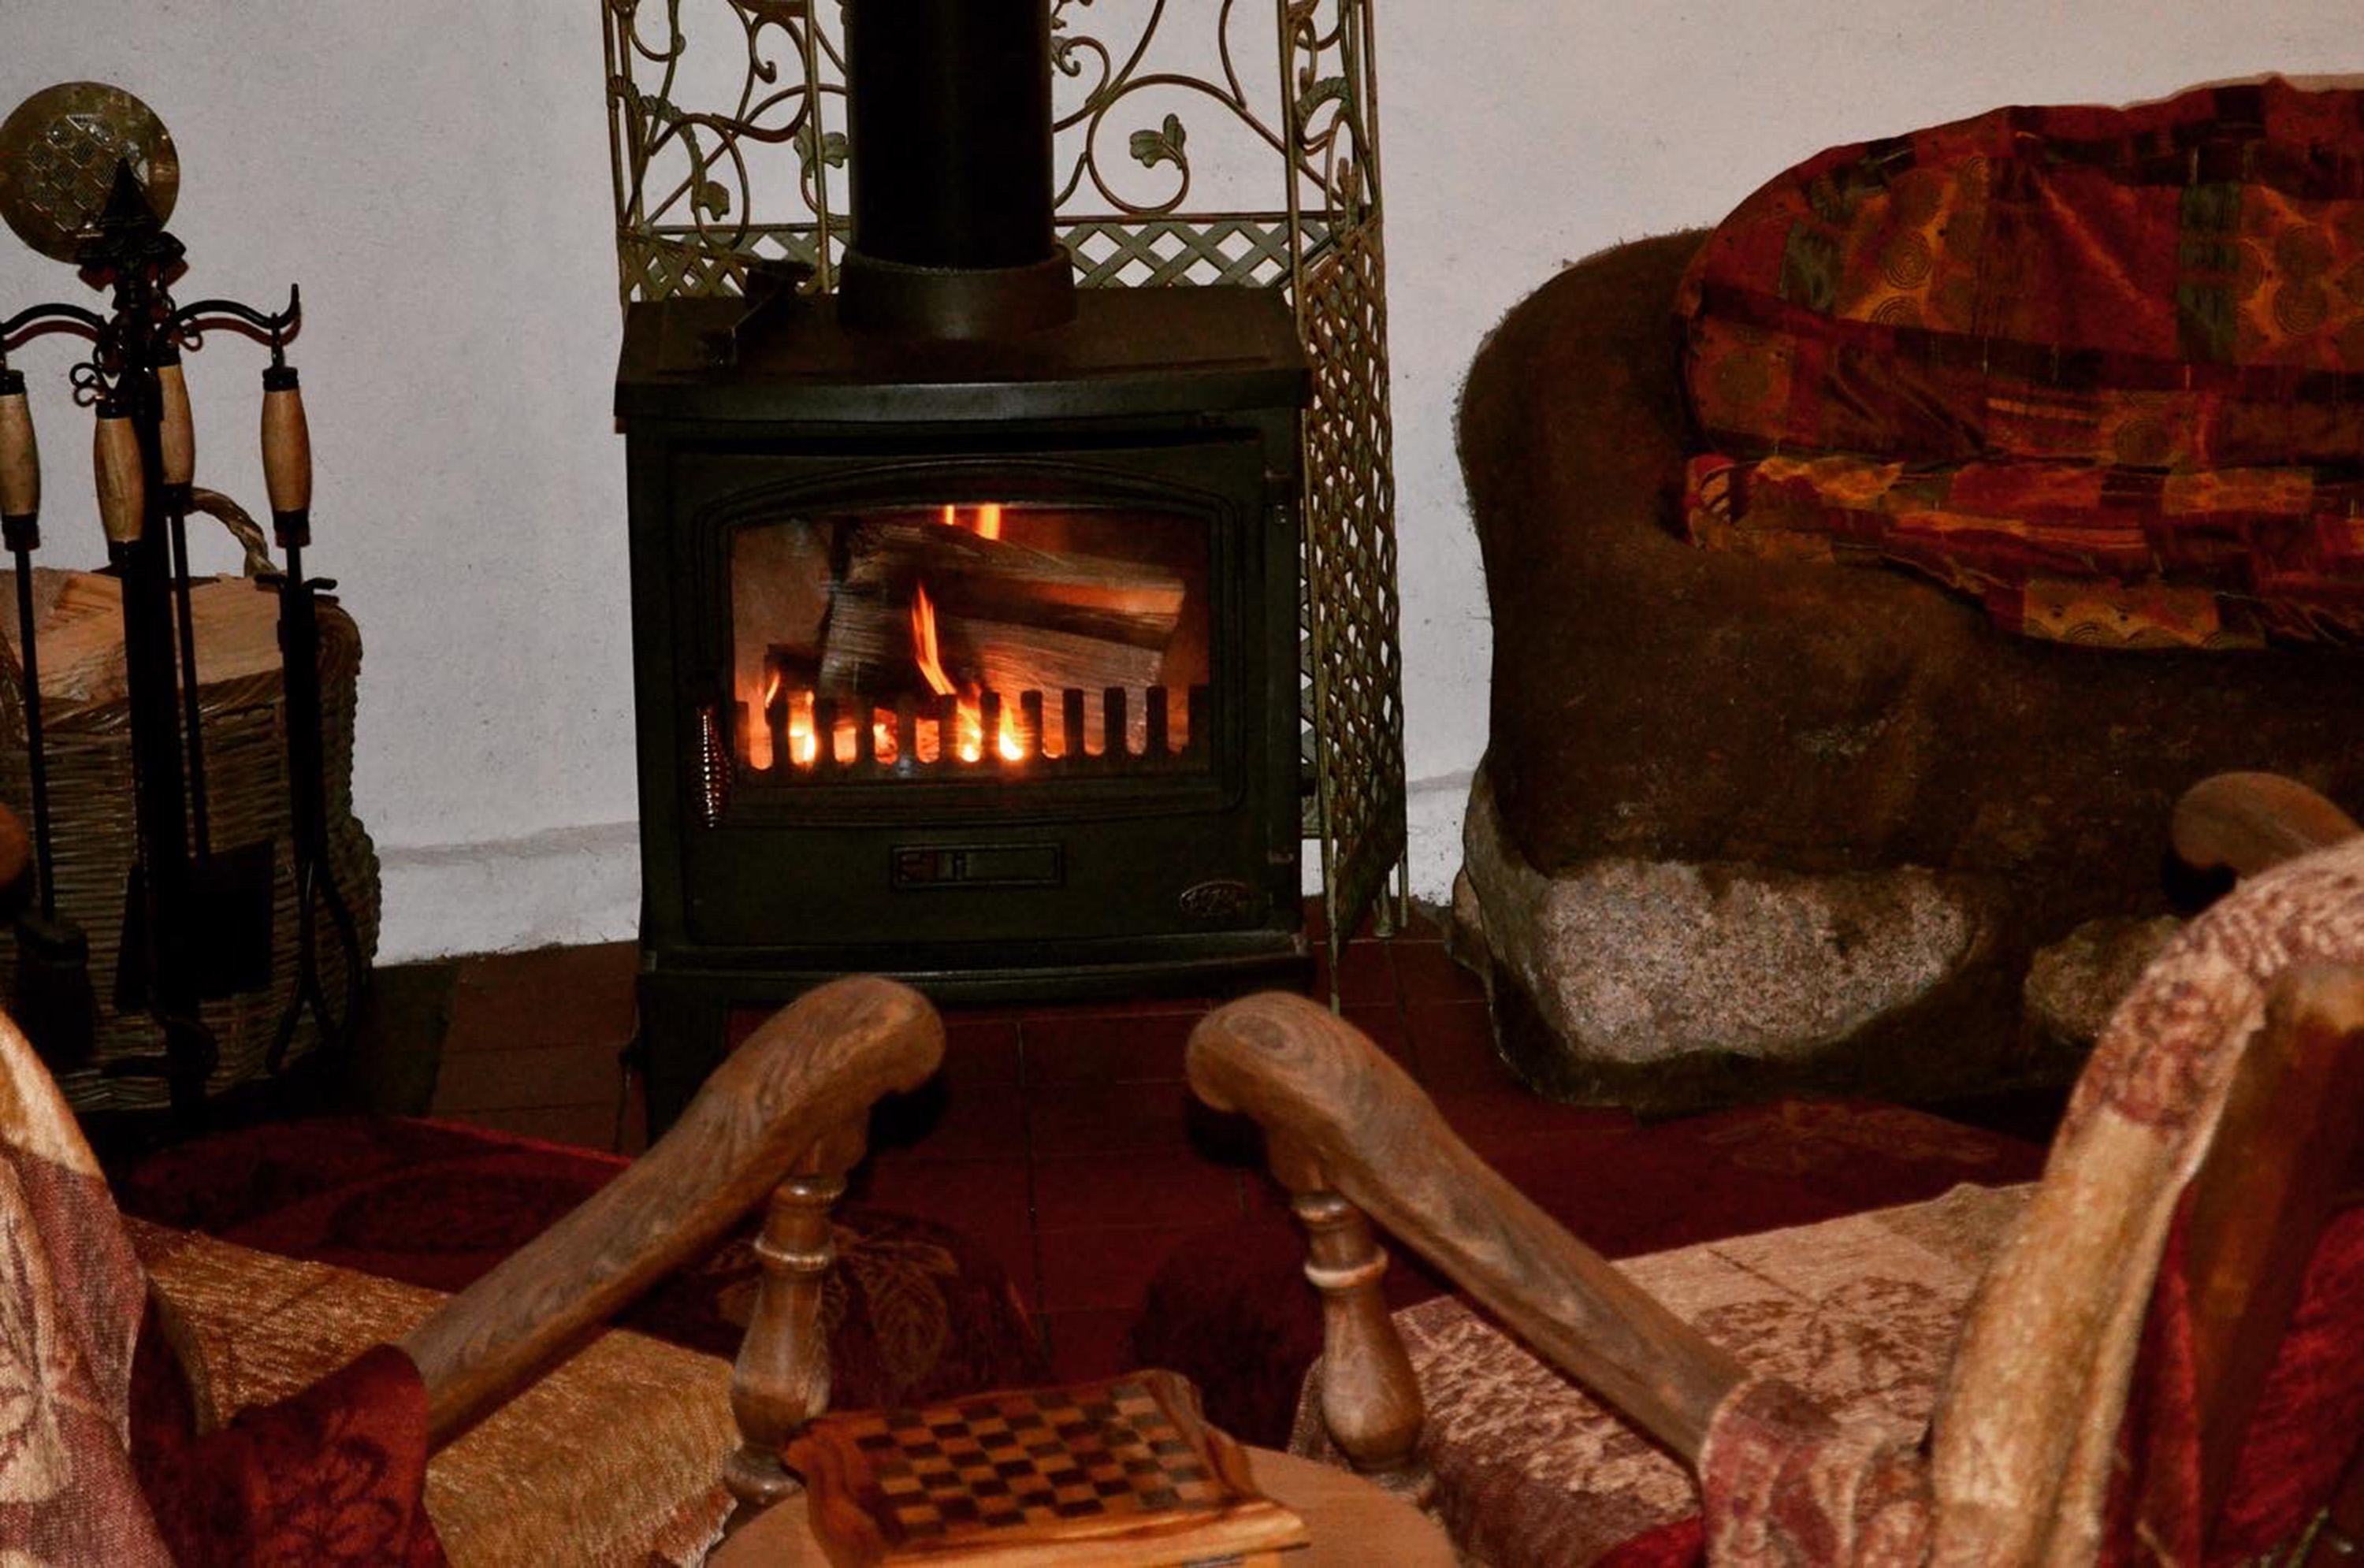 Hideaway Under the Stars interior showing fireplace